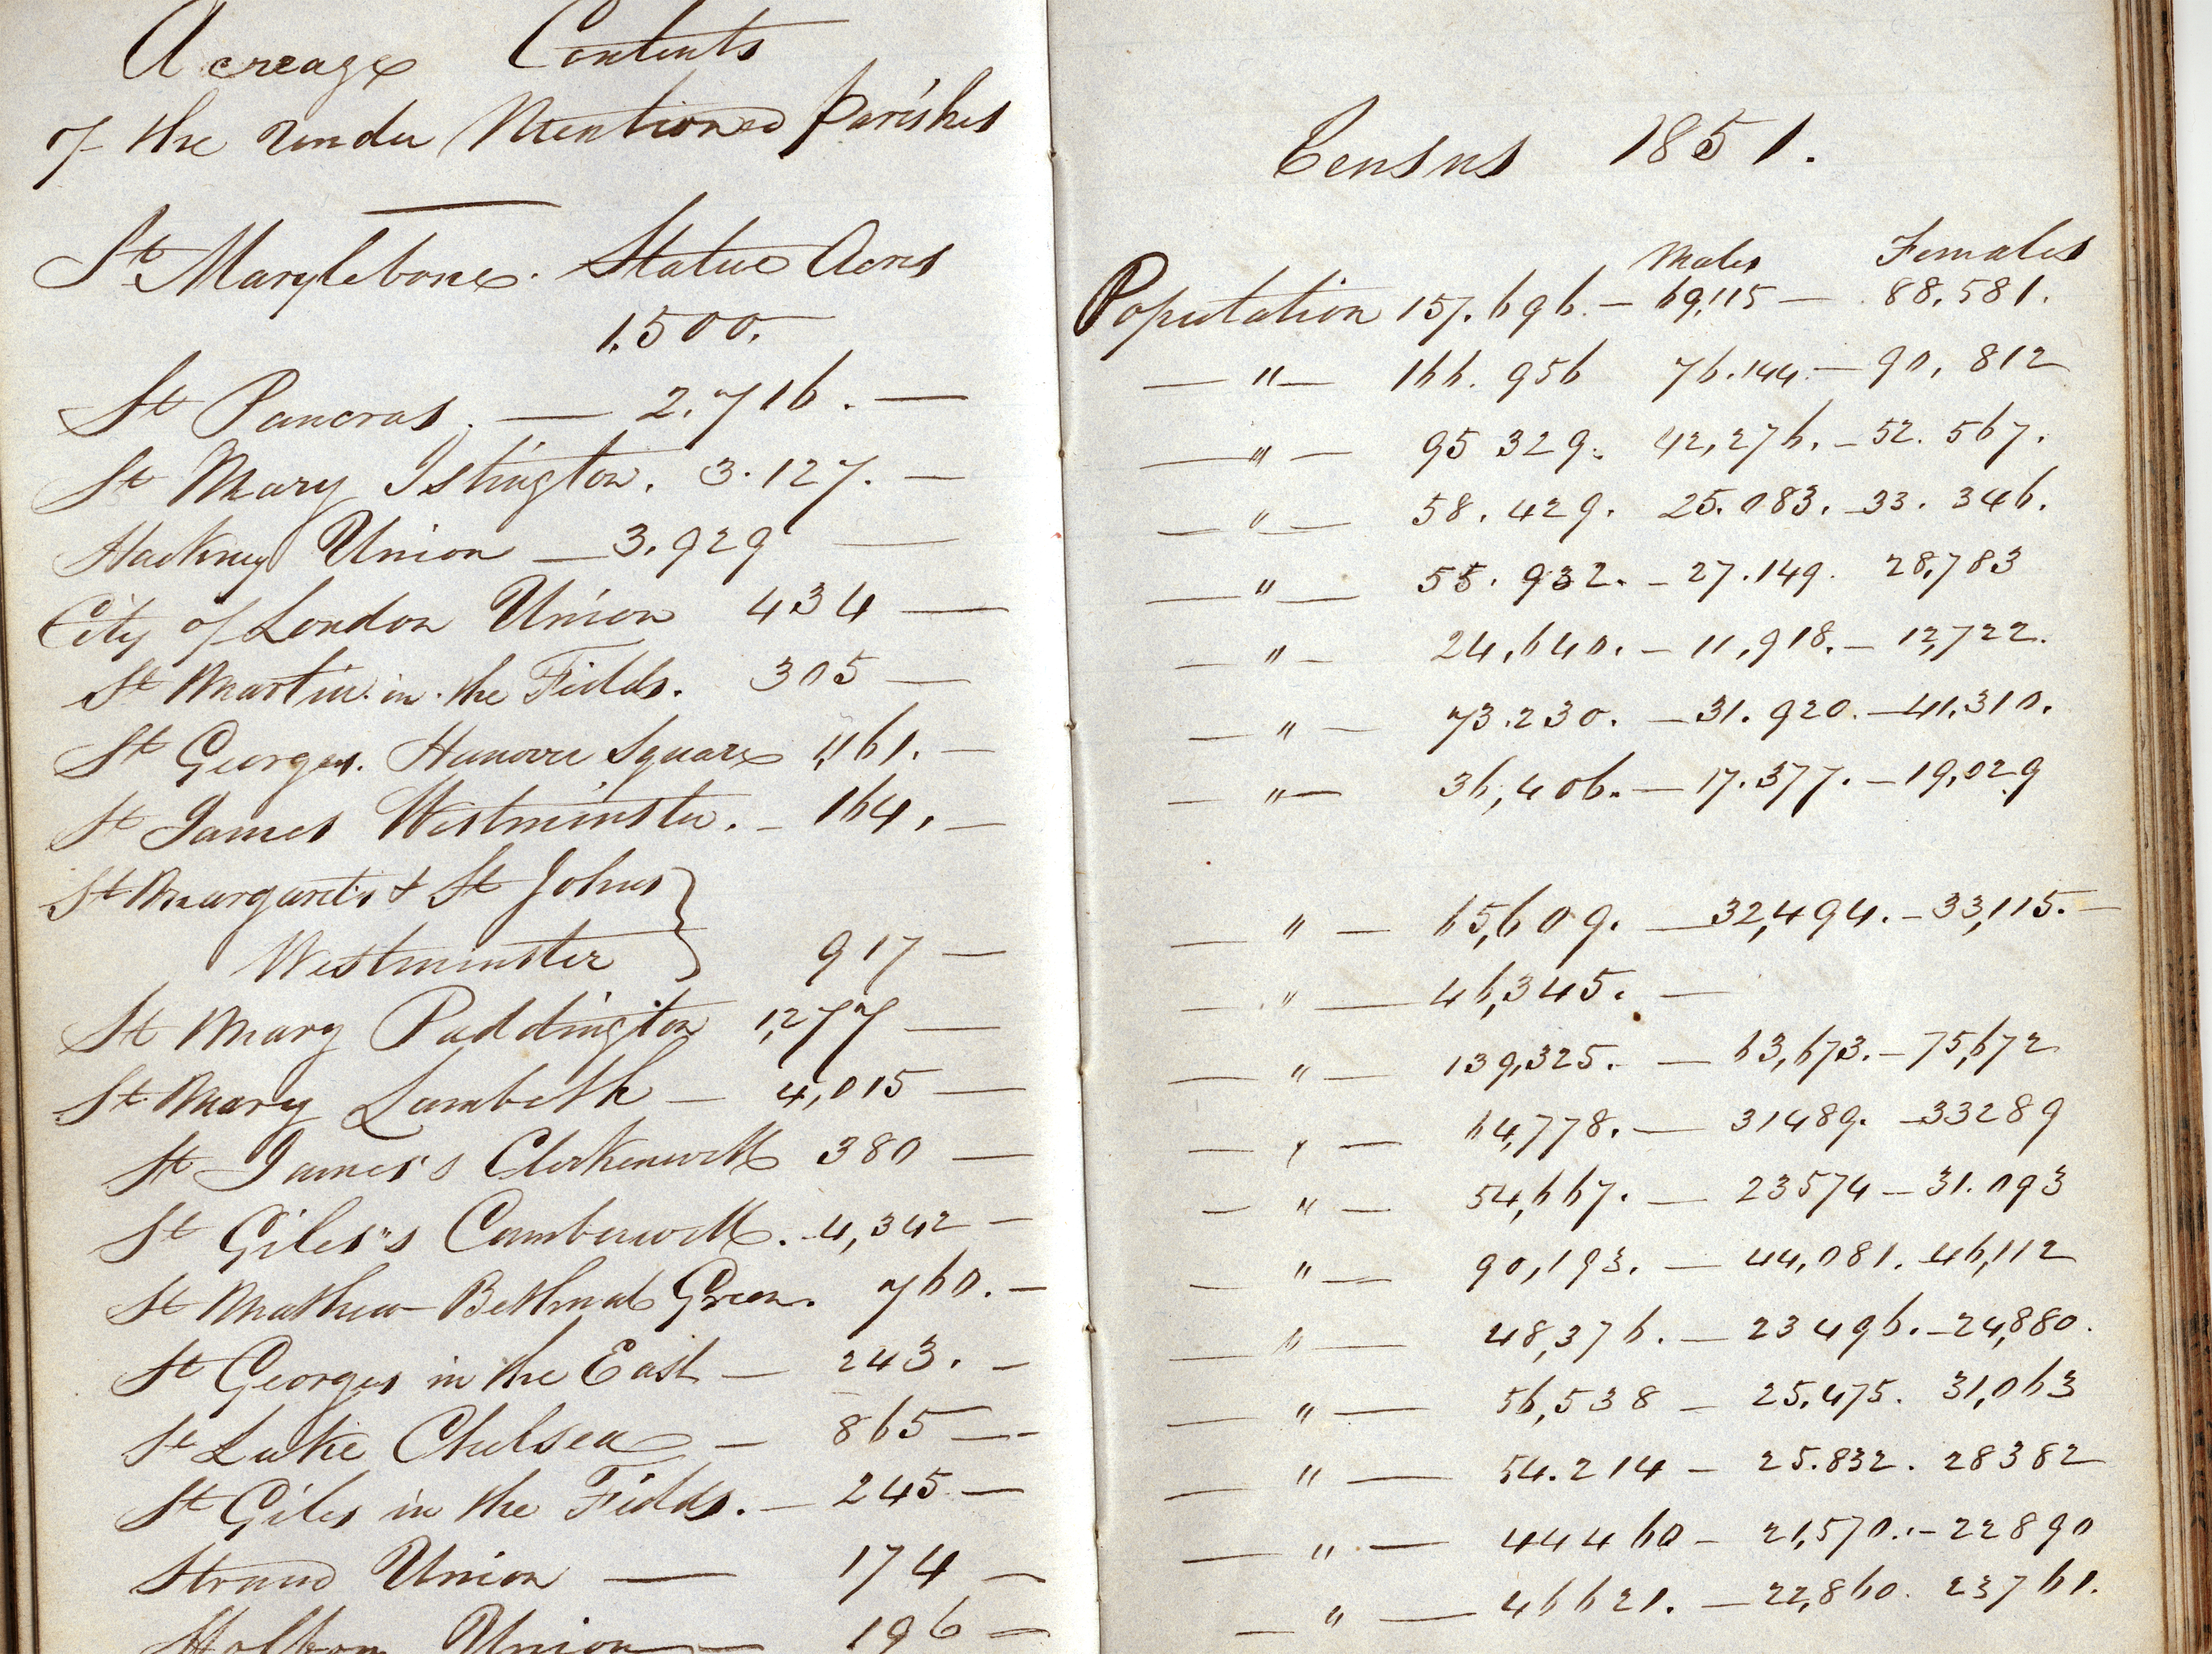 A handwritten ledger from the 18th century